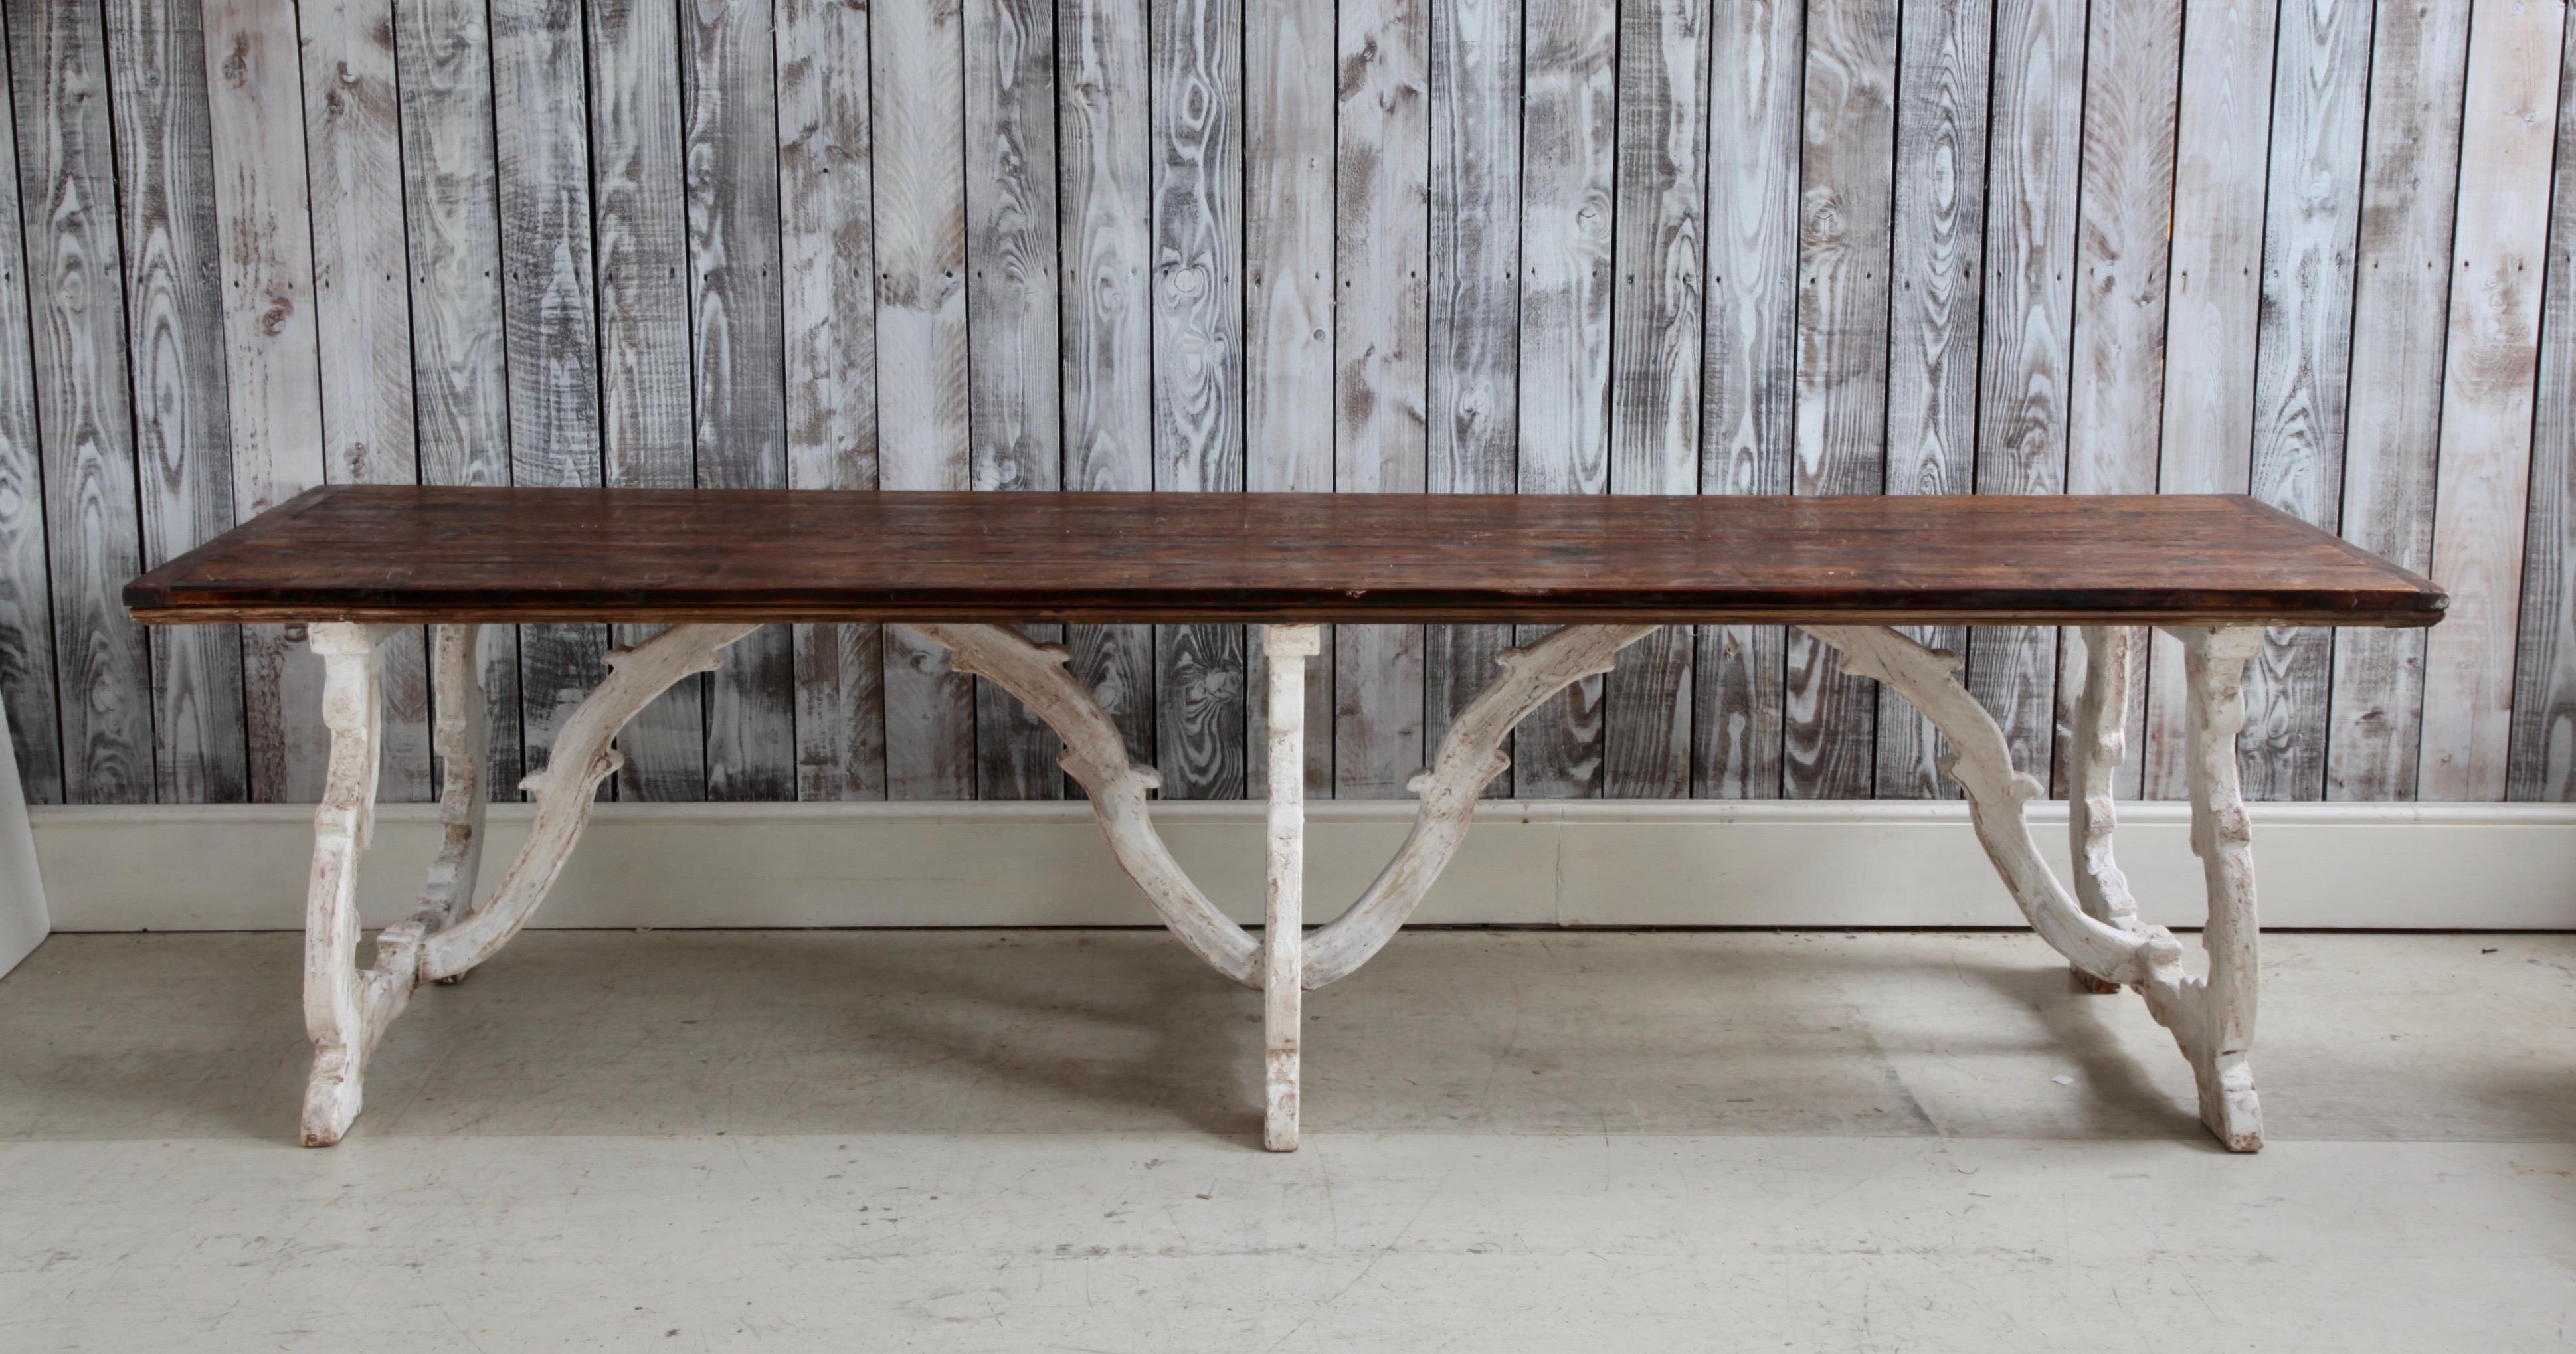 Rustic Country House Dining Table From Tuscany, Italy